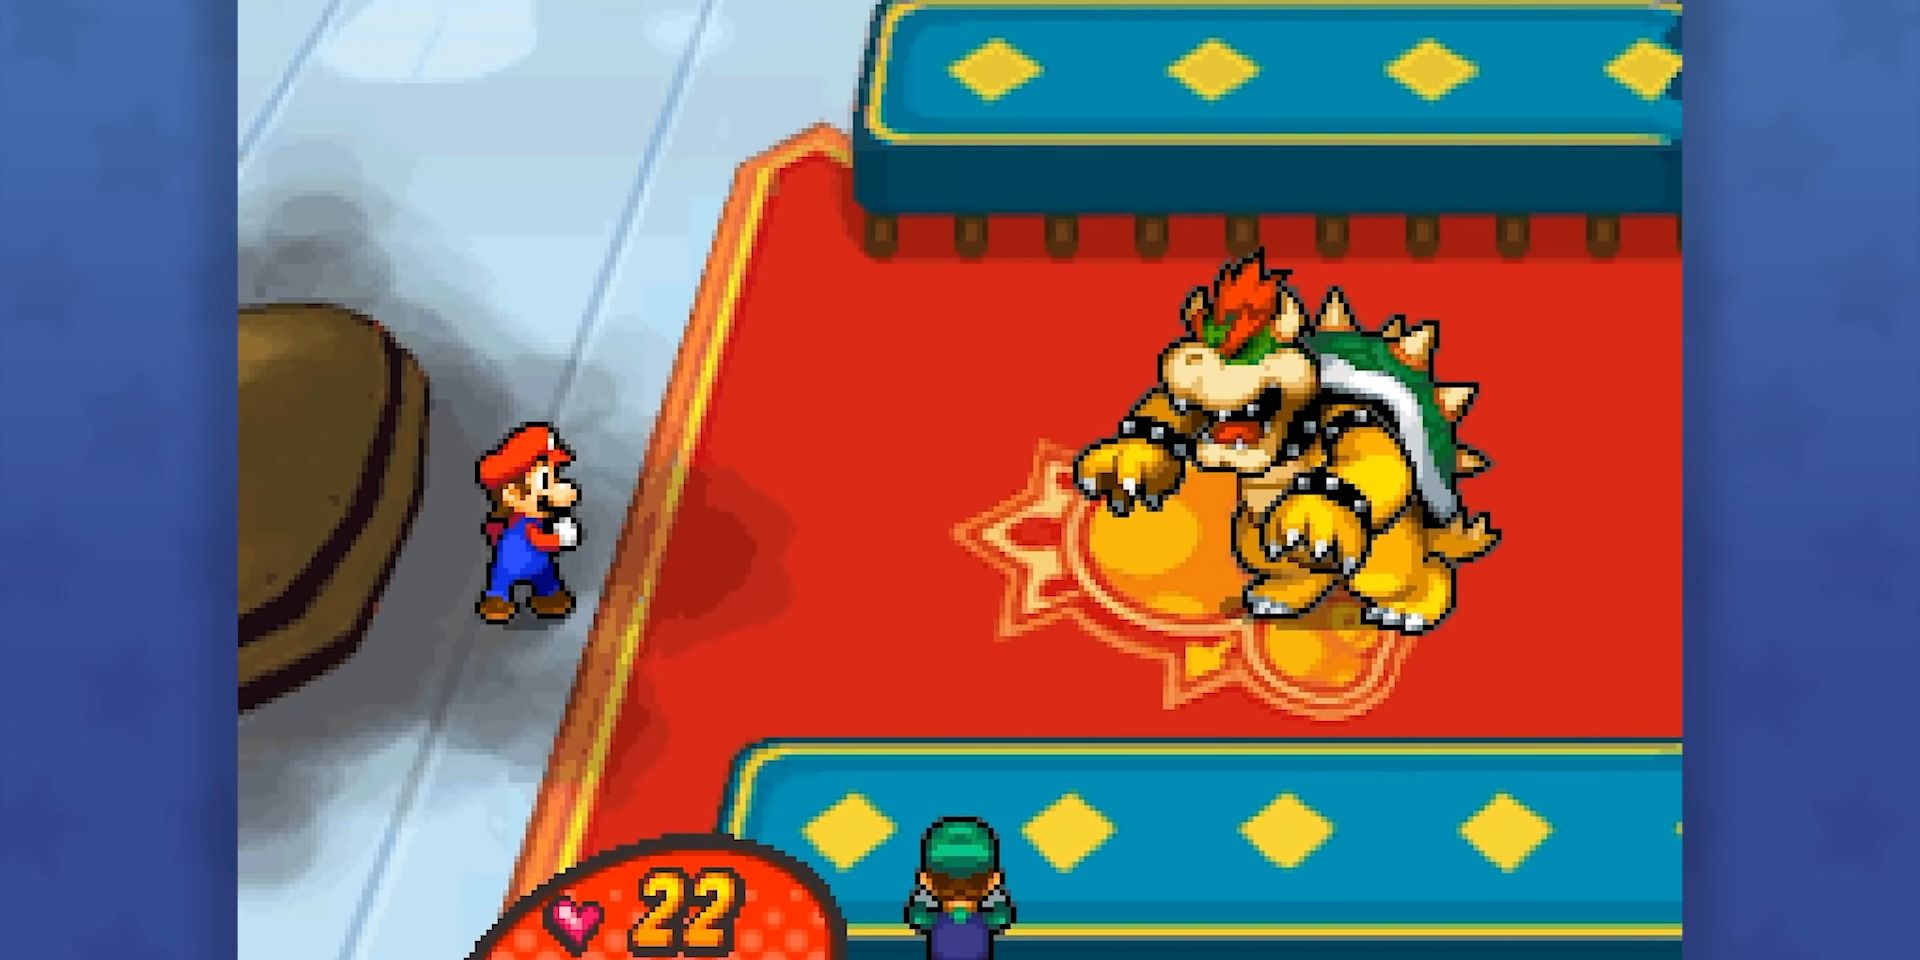 A screenshot showing a scene from Mario & Luigi: Bowser's Inside Story